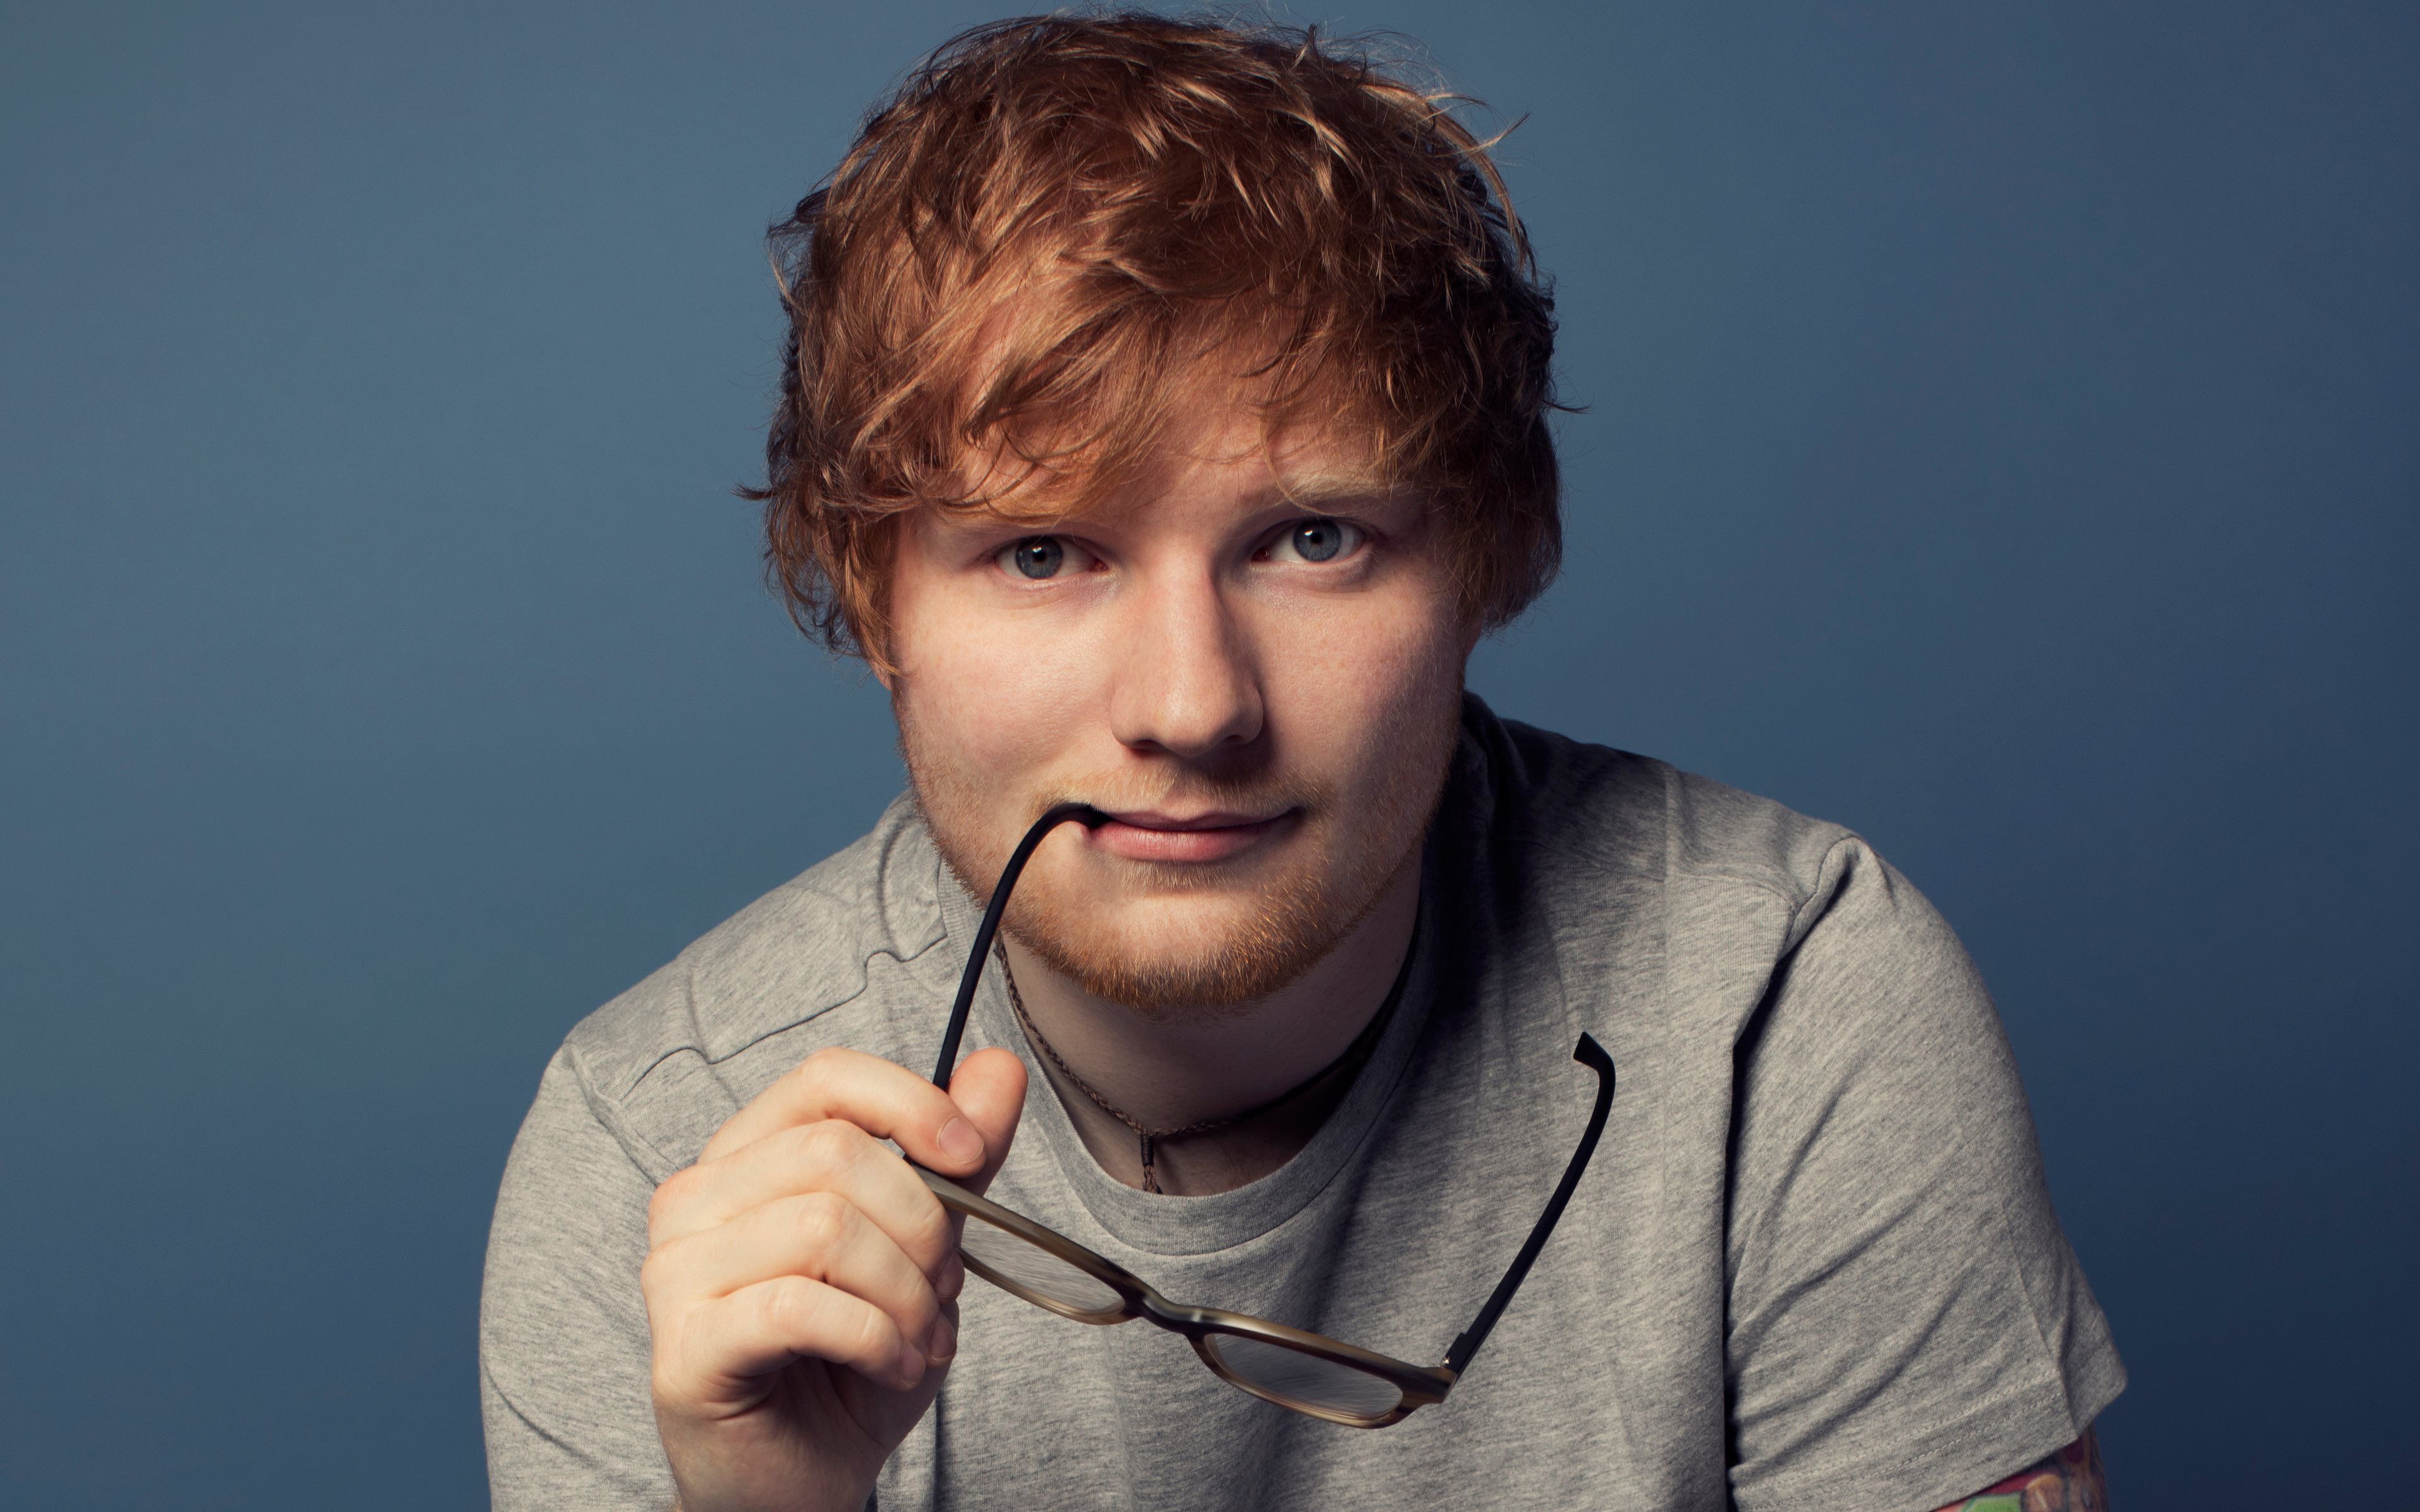 Download wallpaper Ed Sheeran, portrait, British stars, young singers, British singer, 4k for desktop with resolution 3840x2400. High Quality HD picture wallpaper